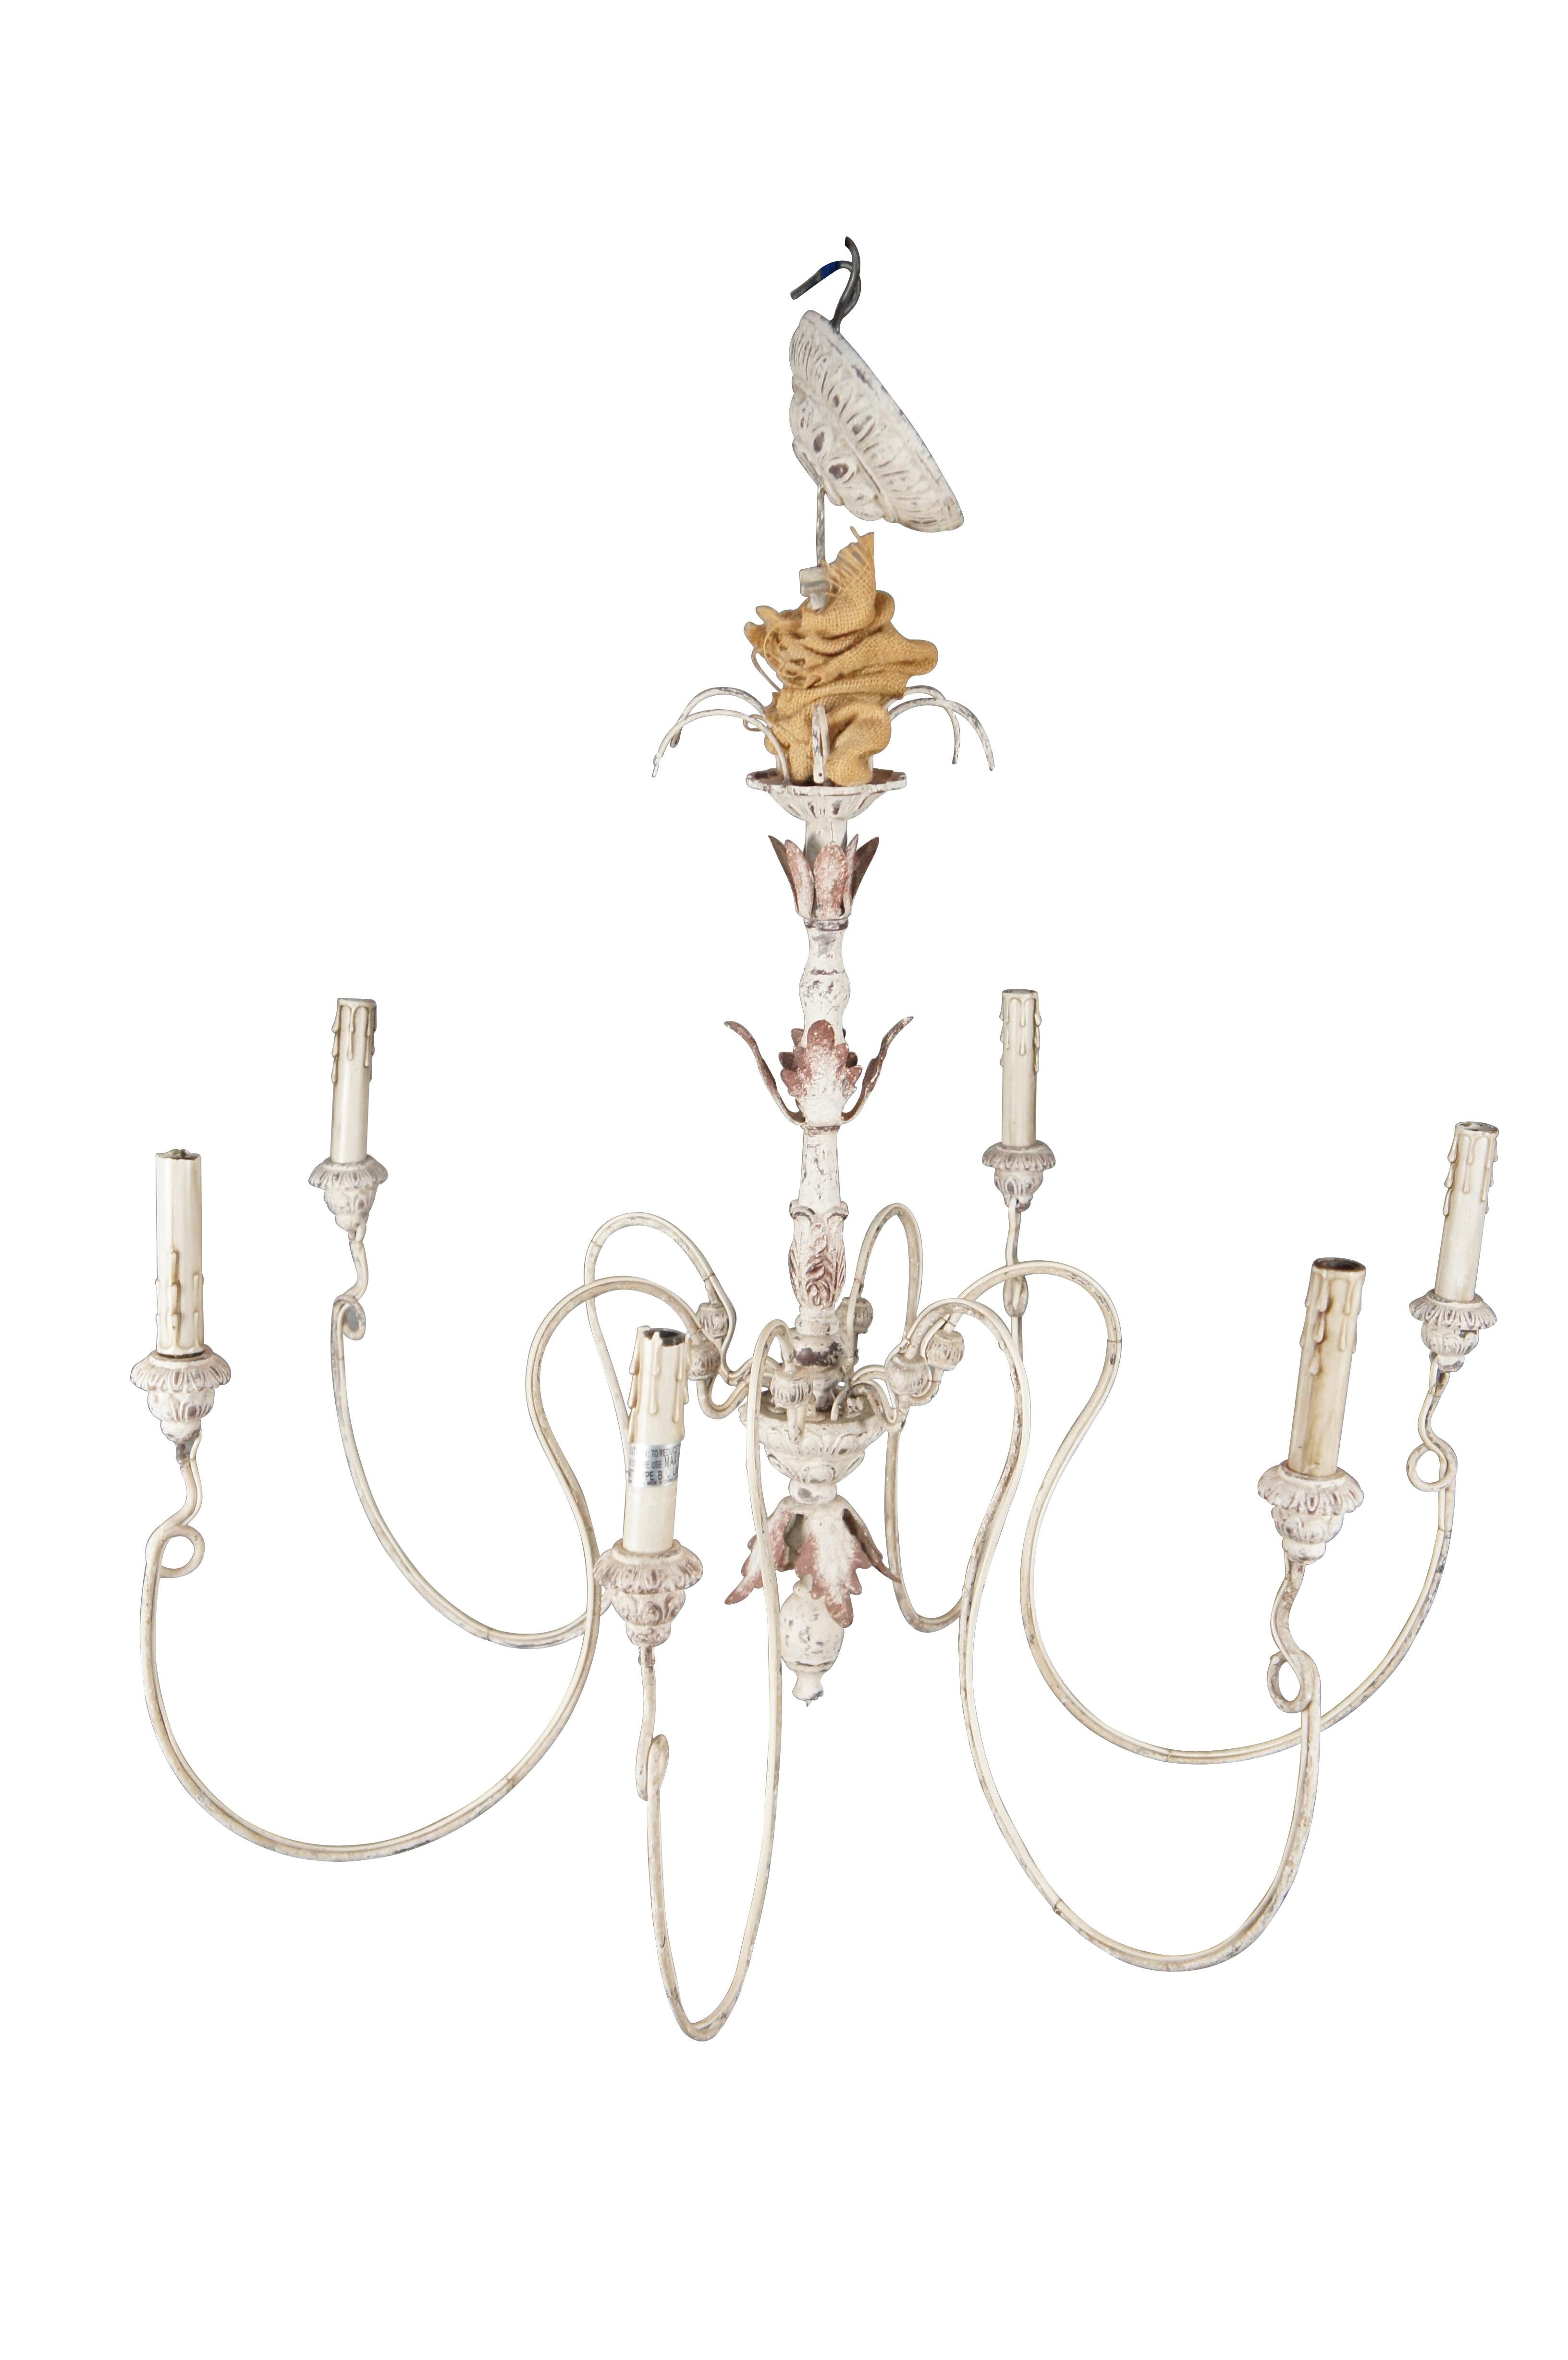 French Provincial Horchow French Country Farmhouse 6 Light Chandelier Chic Aidan Gray Style 34